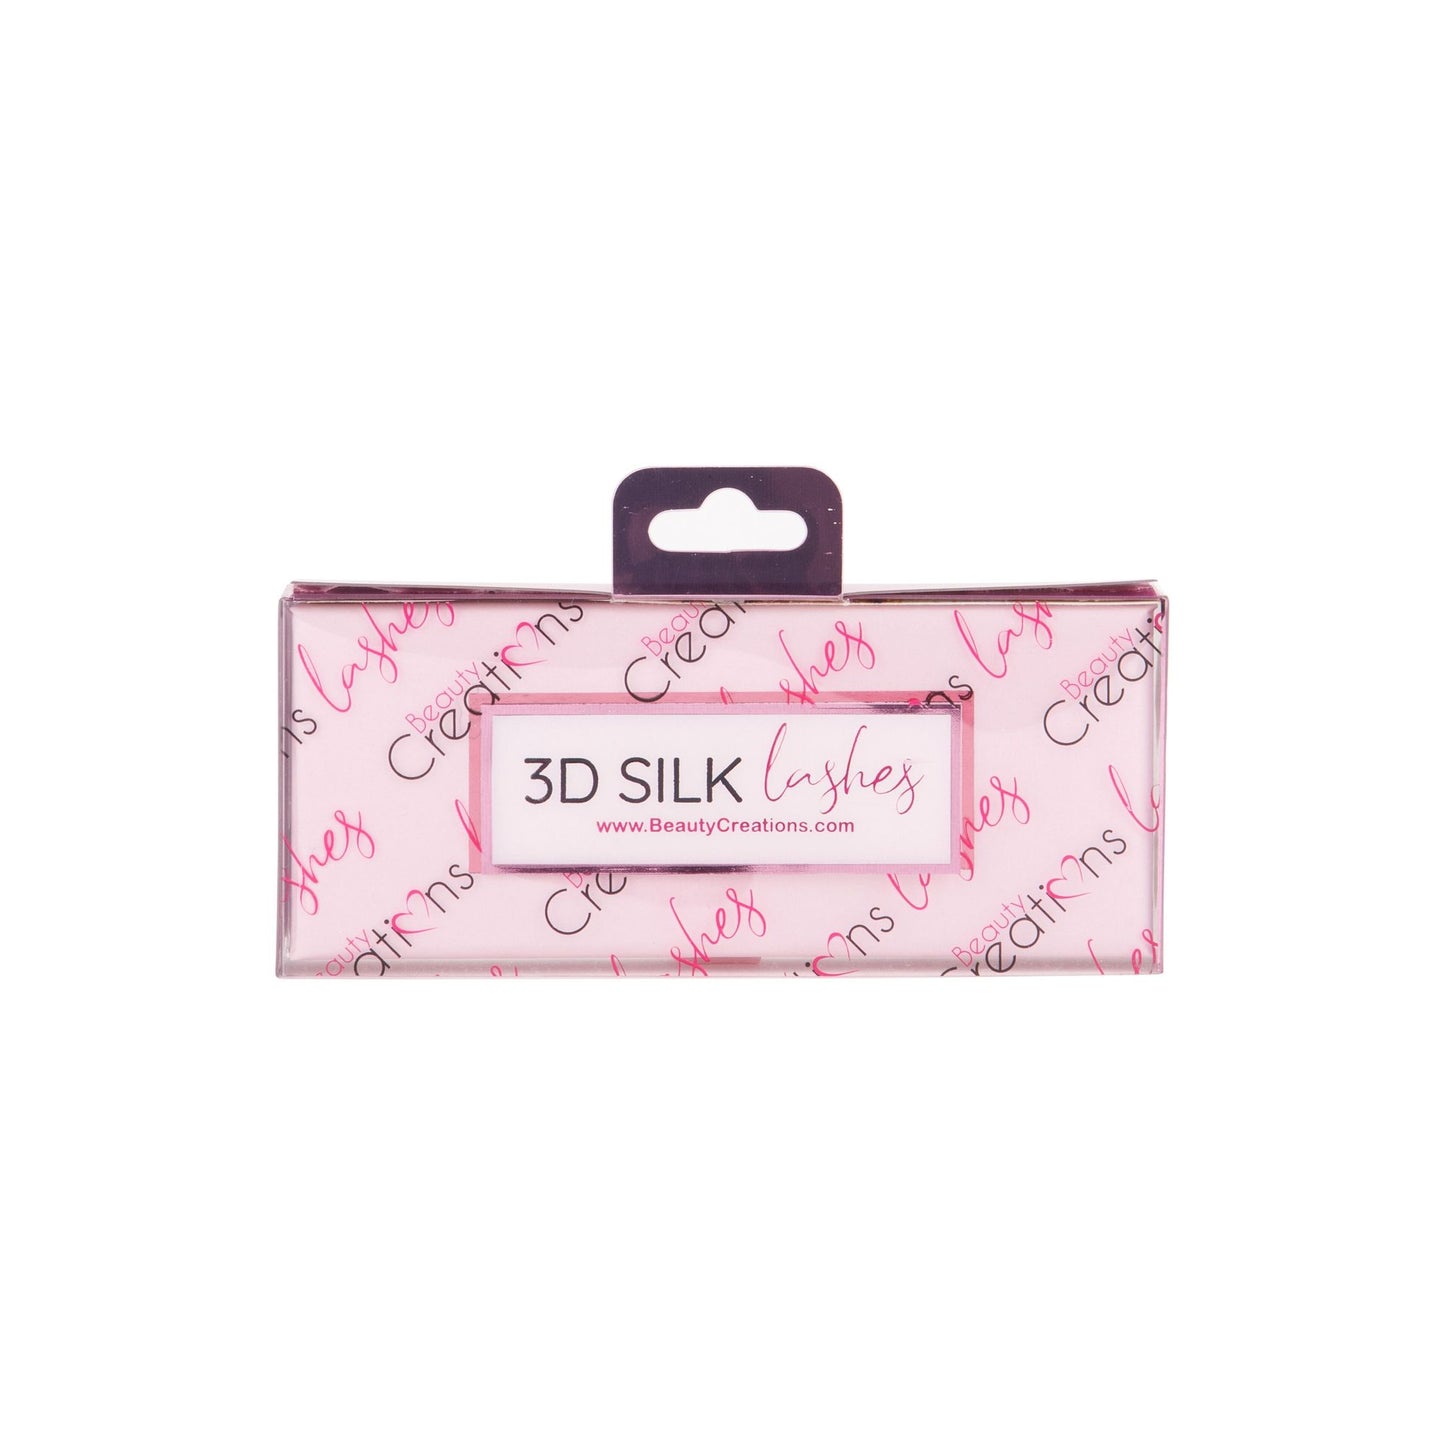 I Can Afford It - 3D Silk Lashes